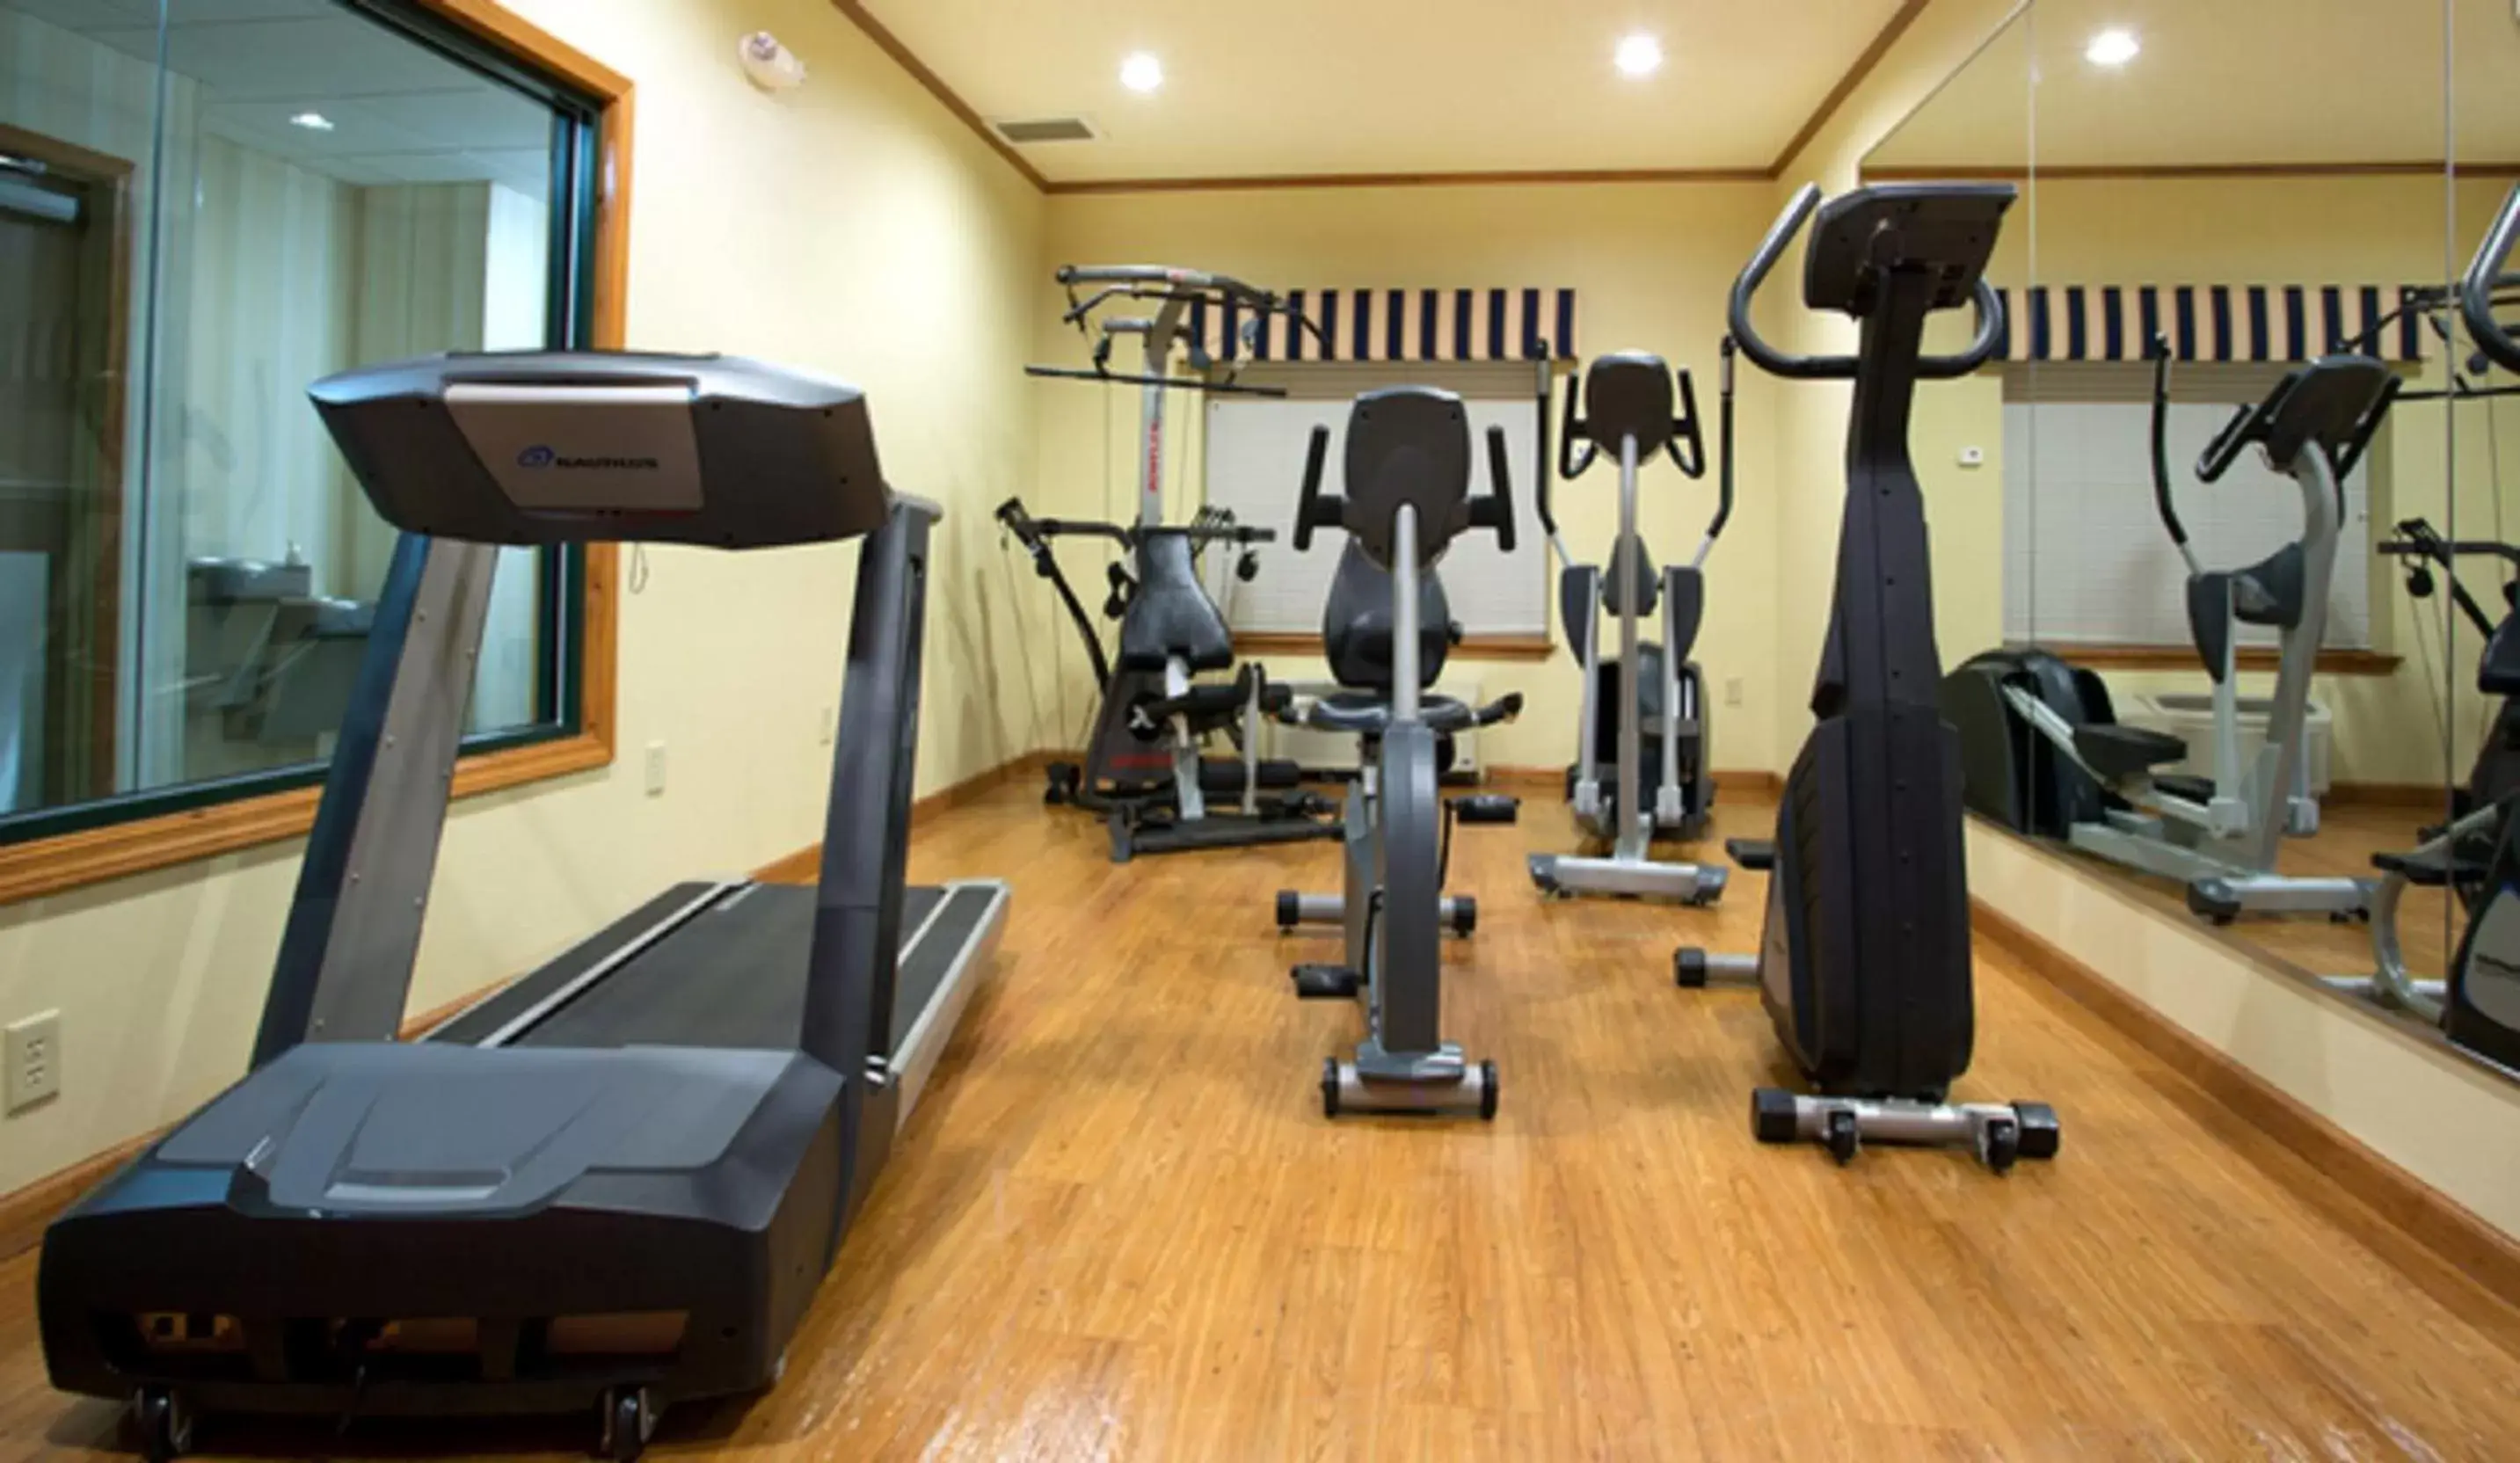 Fitness centre/facilities, Fitness Center/Facilities in Country Inn & Suites by Radisson, Pineville, LA